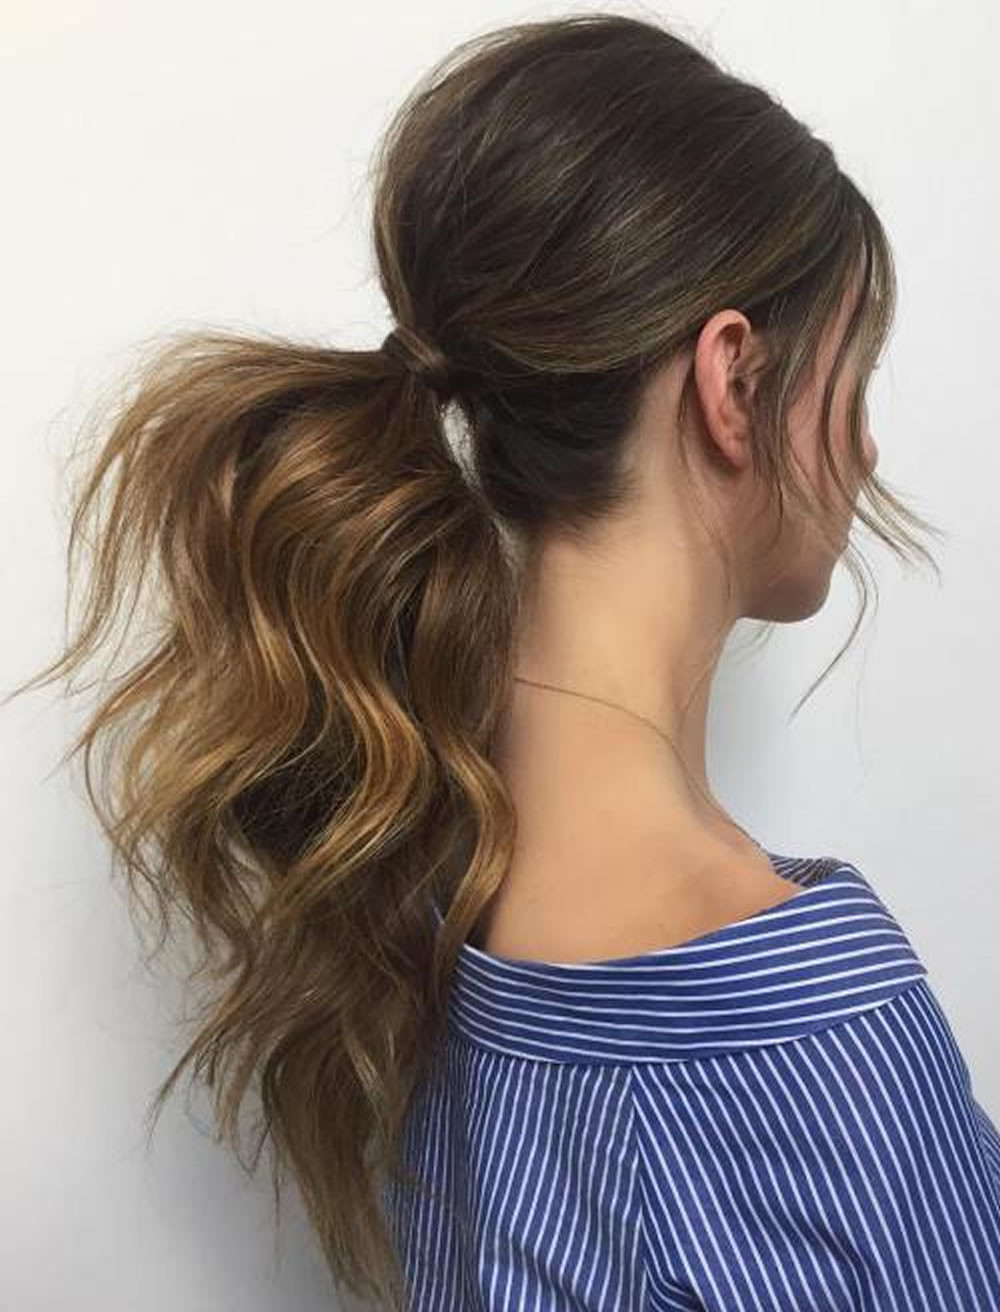 Cool Long Haircuts
 The 20 Most Attractive Ponytail Hairstyles for Women